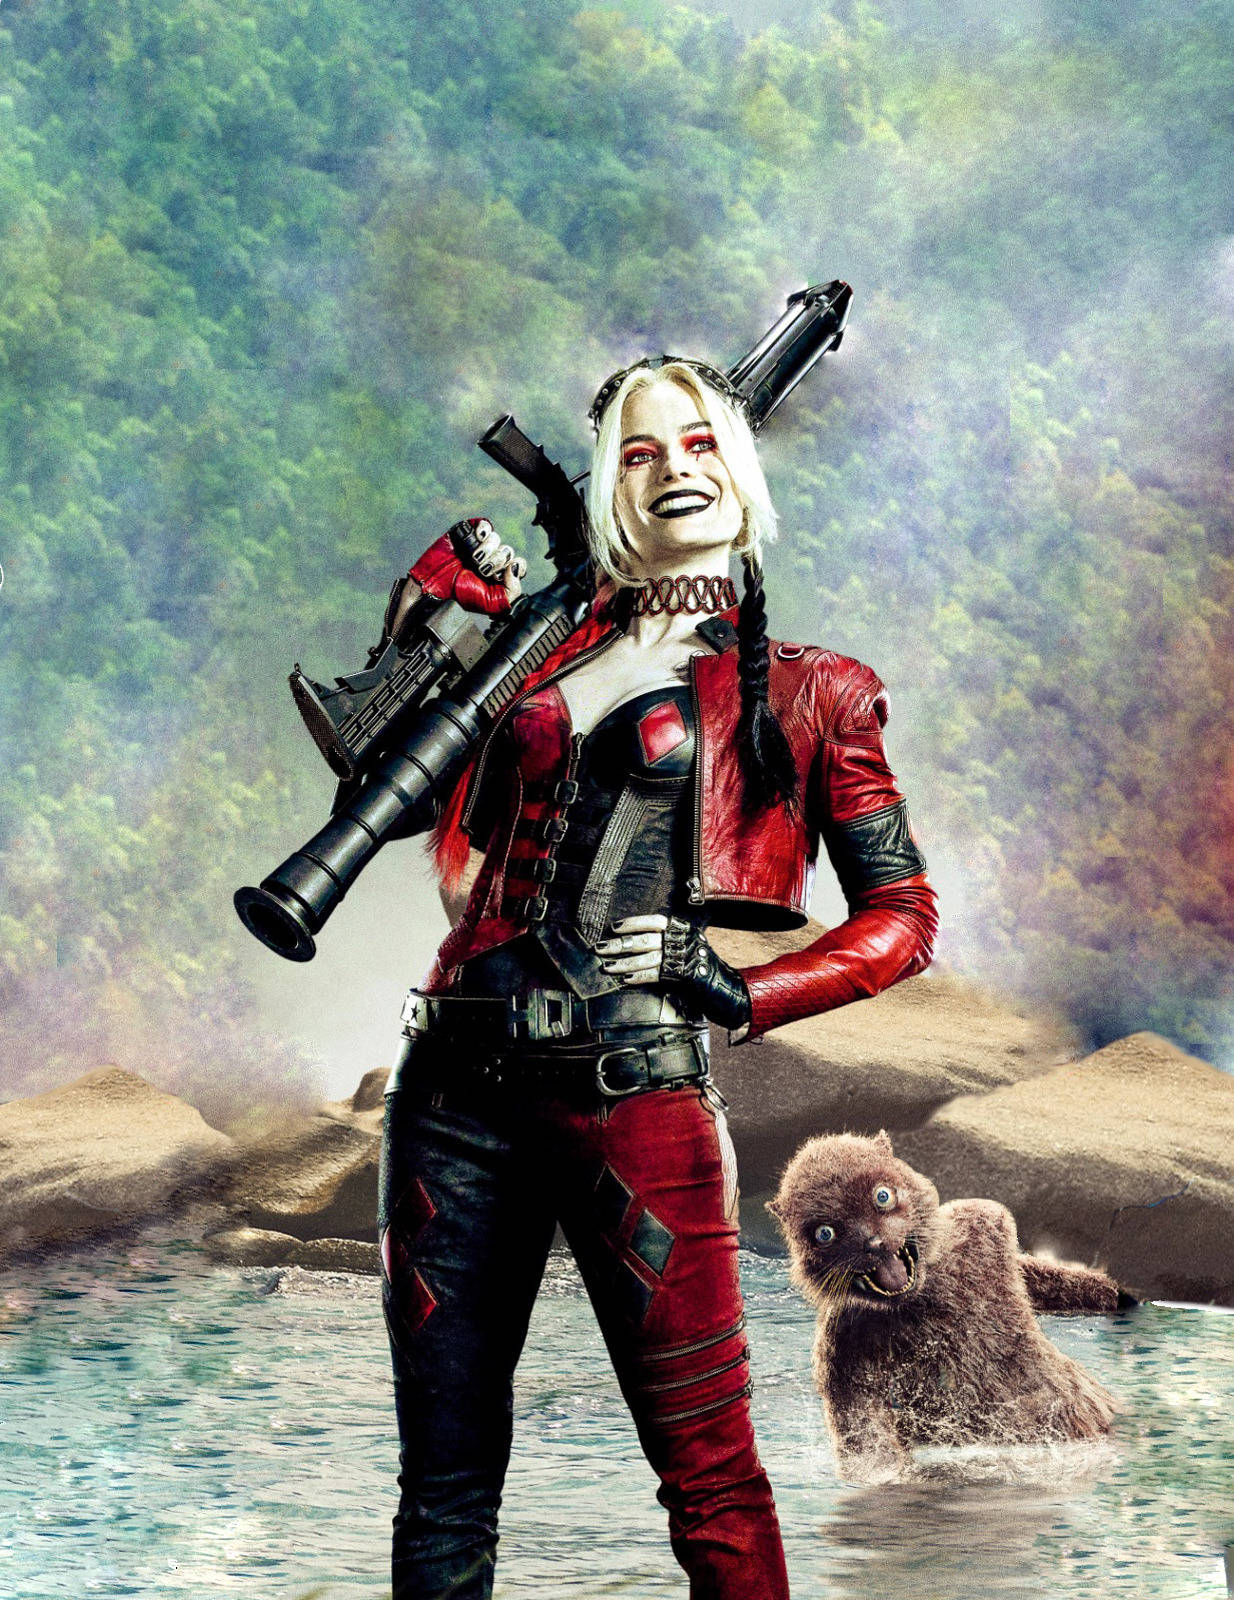 Harley Quinn Looks Ready To Take On The World In Her New Tactical Outfit. Background